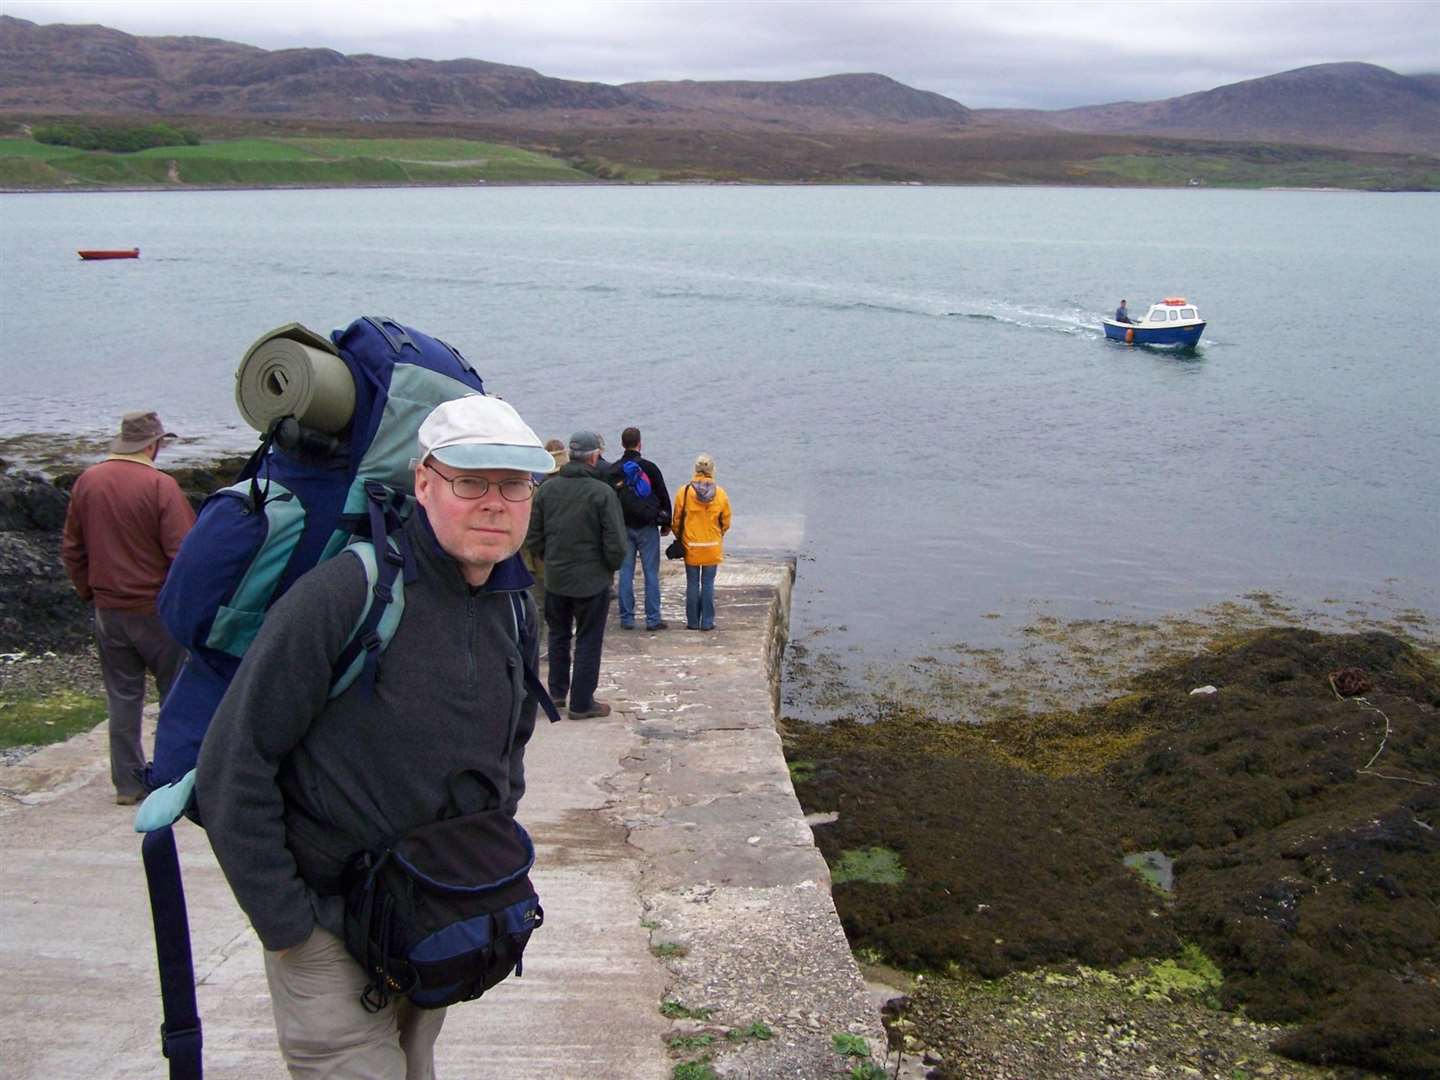 Dr Nick Lindsay at the Keoldale Ferry on his way to Cape Wrath.